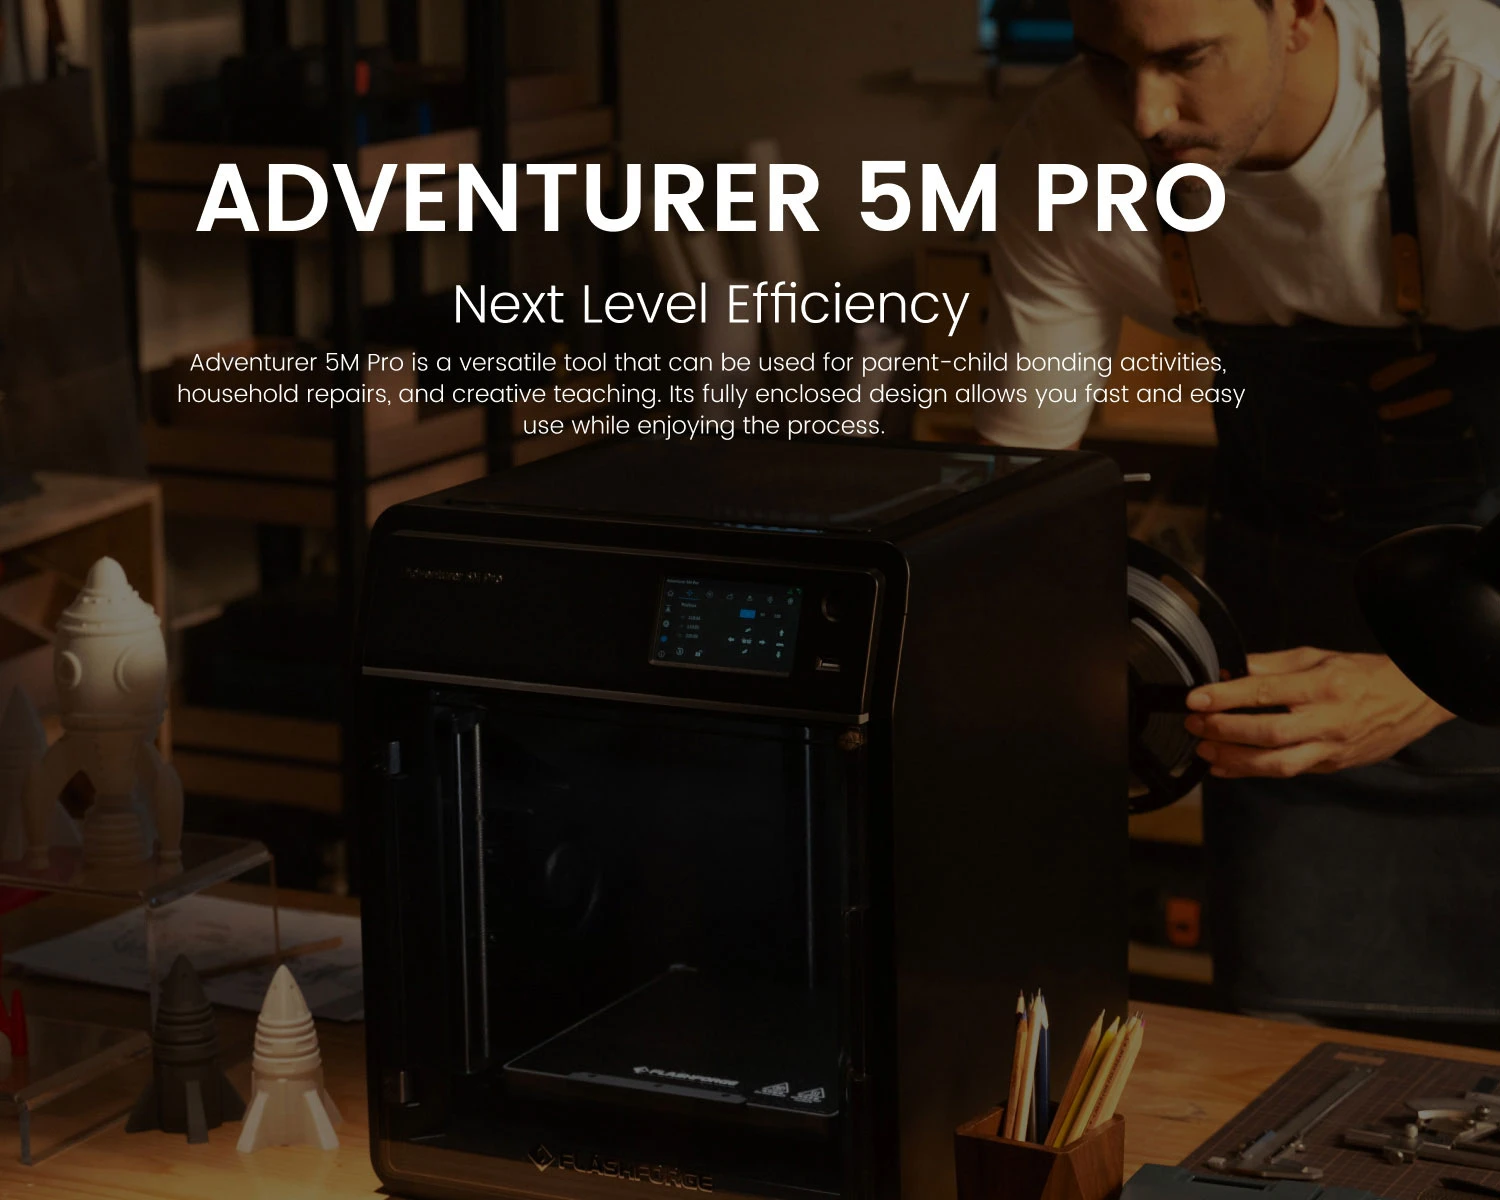 Flashforge Adventurer 5M Pro 3D Printer, Auto Leveling, 600mm/s Max Printing Speed, Remote Camera Monitoring, Filament Runout Reminder, Dual Air Filtration System, Automatic Shutdown, 50dB Silent Printing, WiFi Connection, 220x220x220mm